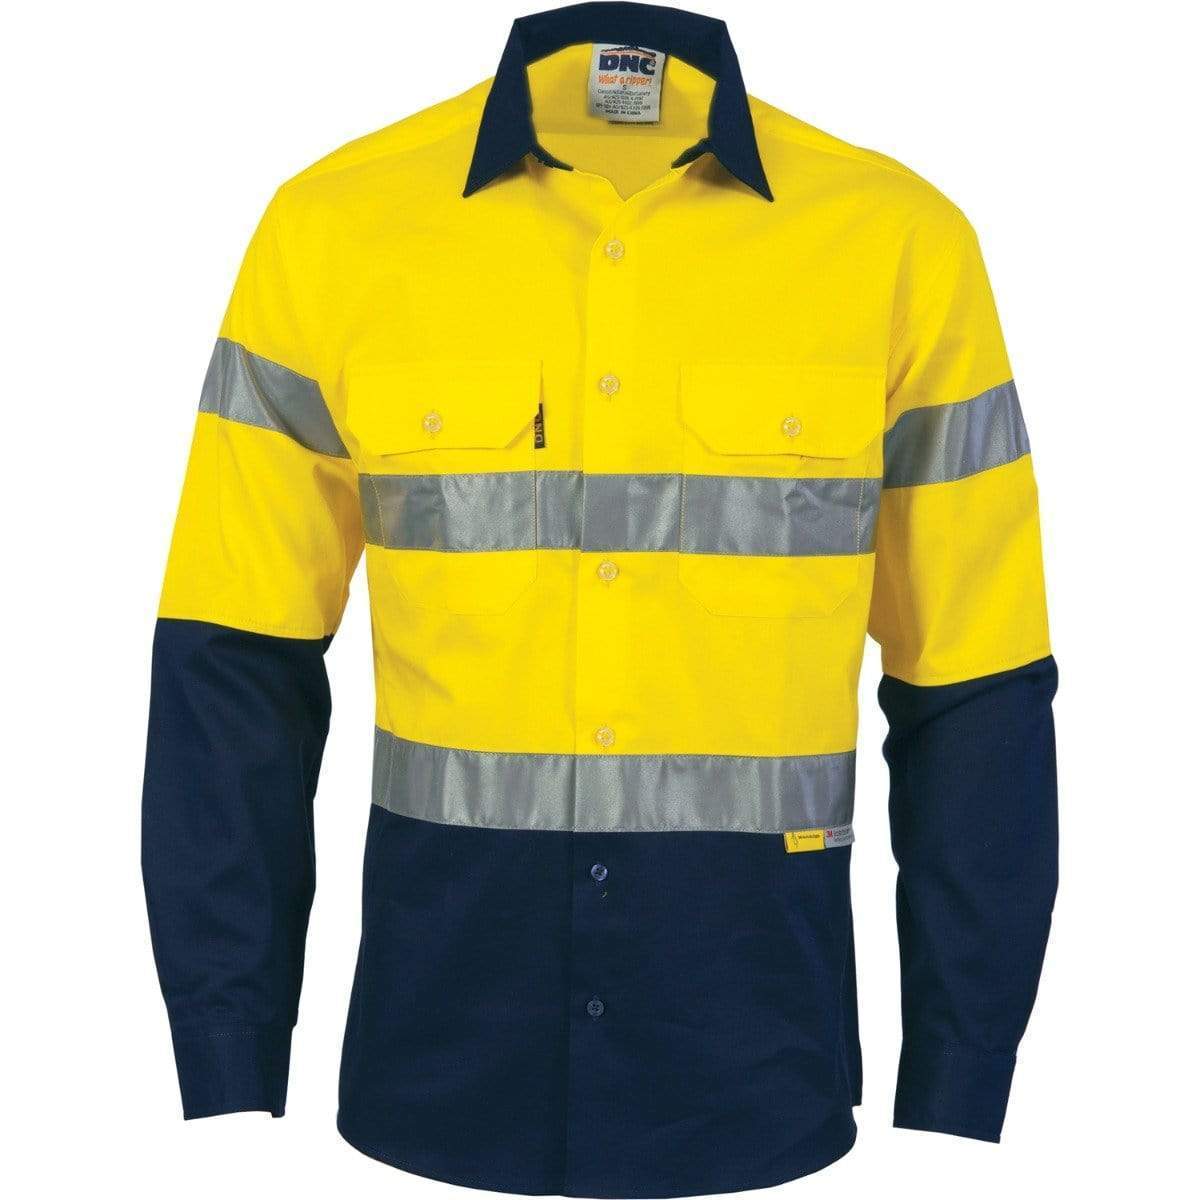 DNC Workwear Work Wear Yellow/Navy / 5XL DNC WORKWEAR Hi-Vis Two Tone Drill Long Sleeve Shirt with 3M 8910 Reflective Tape 3836